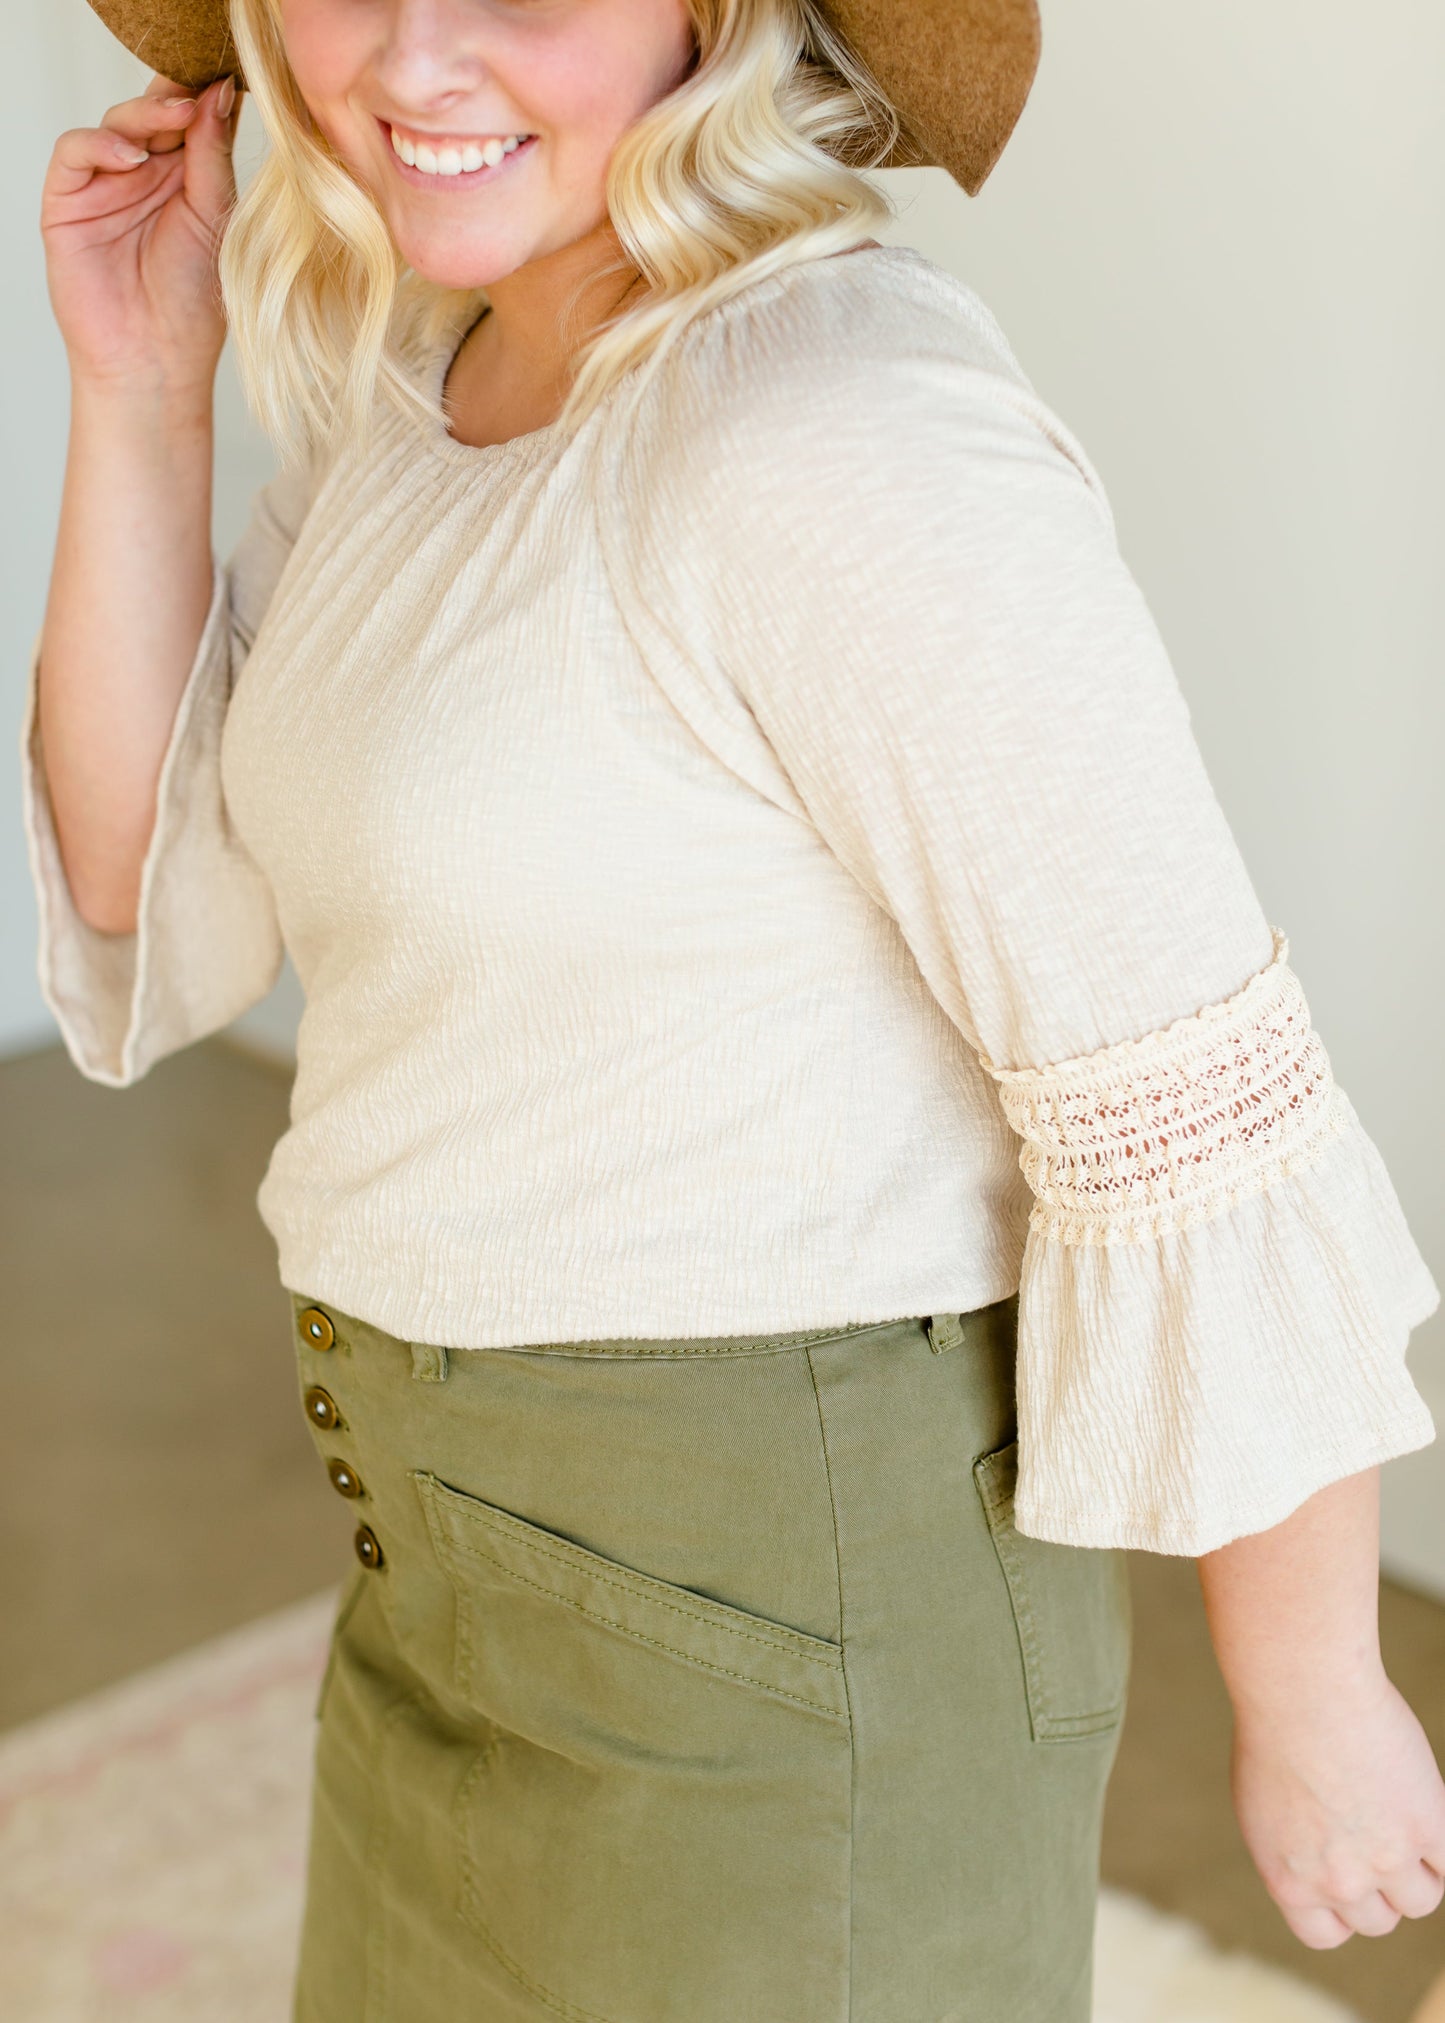 Ivory 3/4 Sleeve Lace Top - FINAL SALE Tops